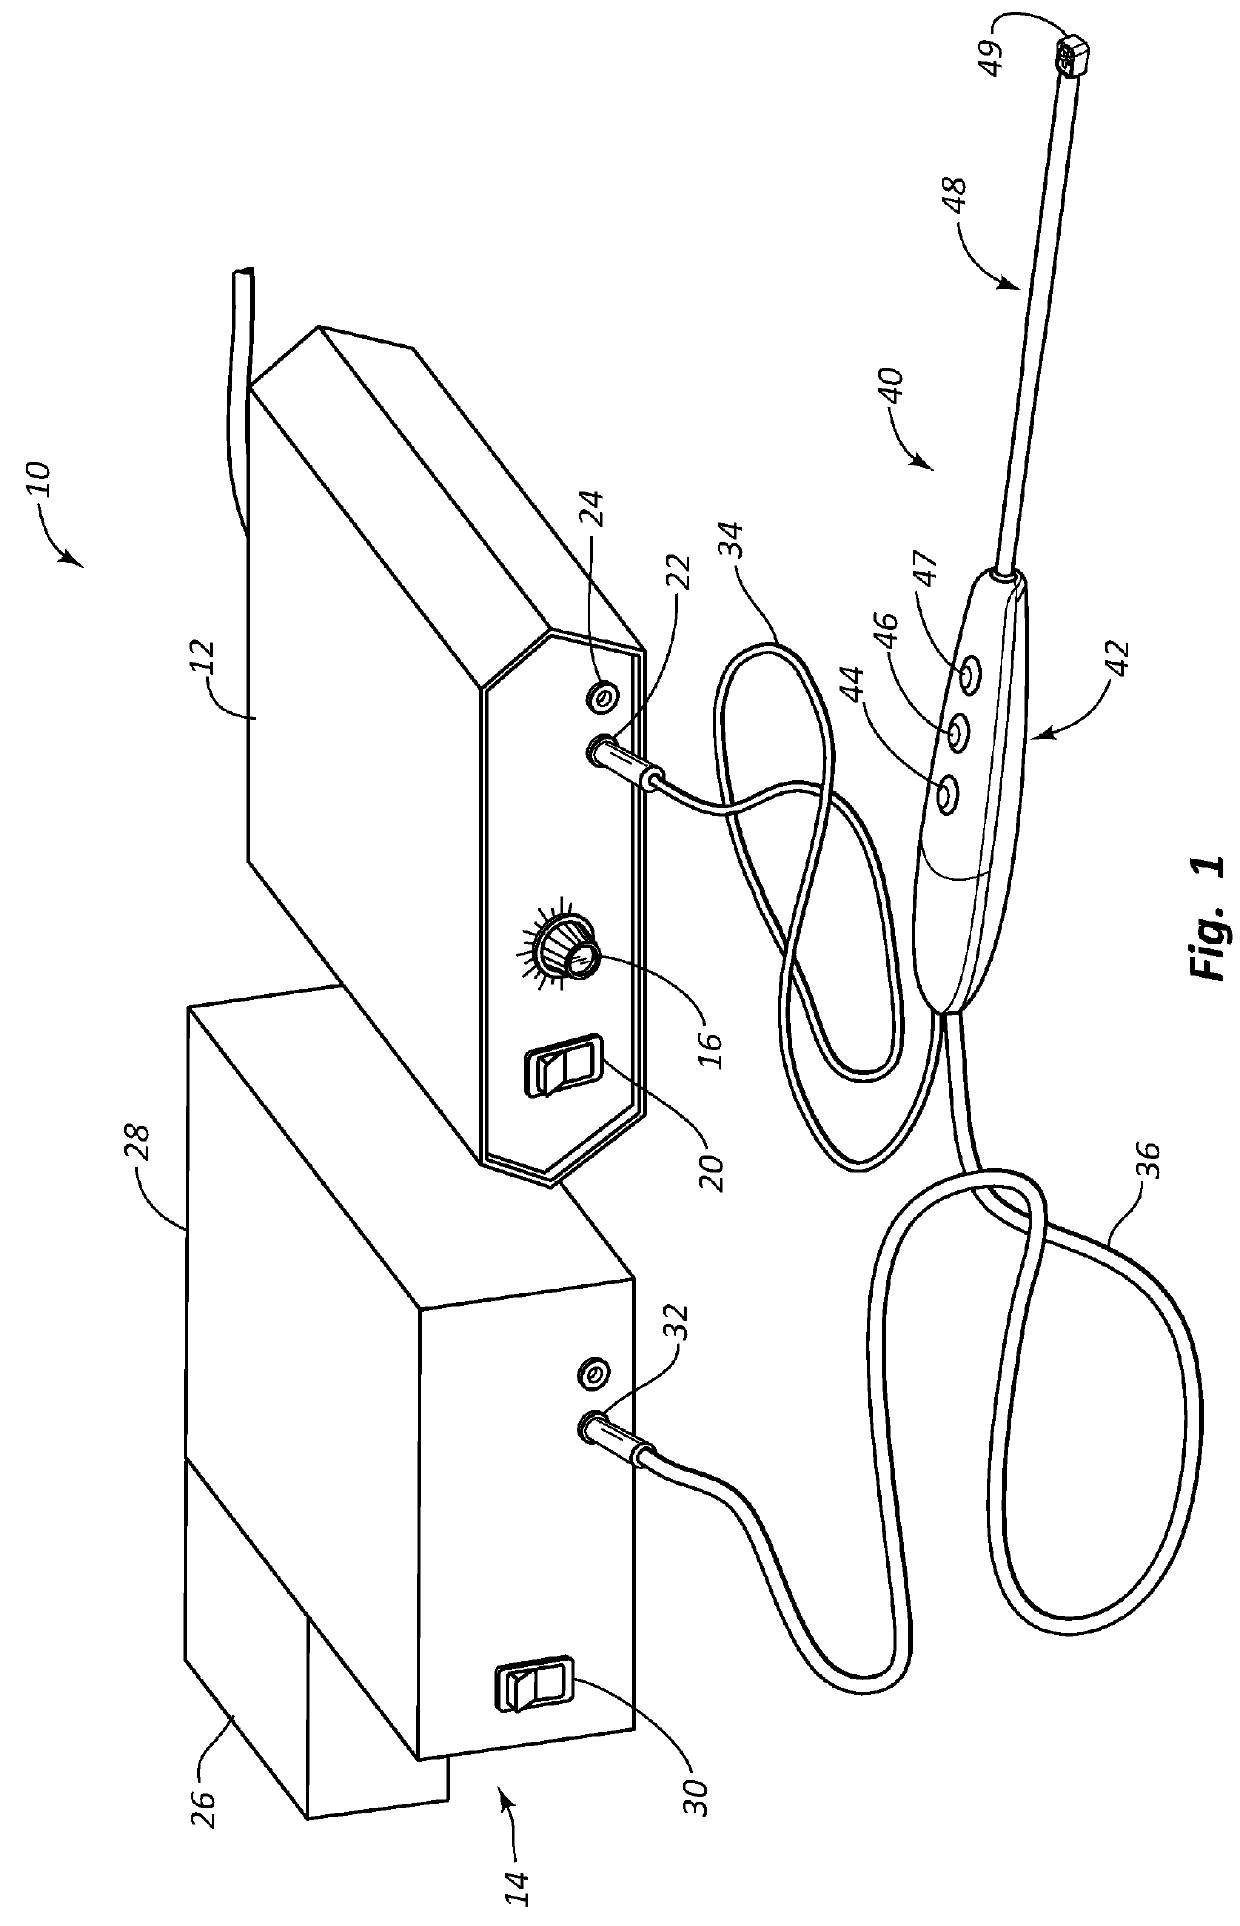 Electrosurgical instrument with selective control of electrode activity